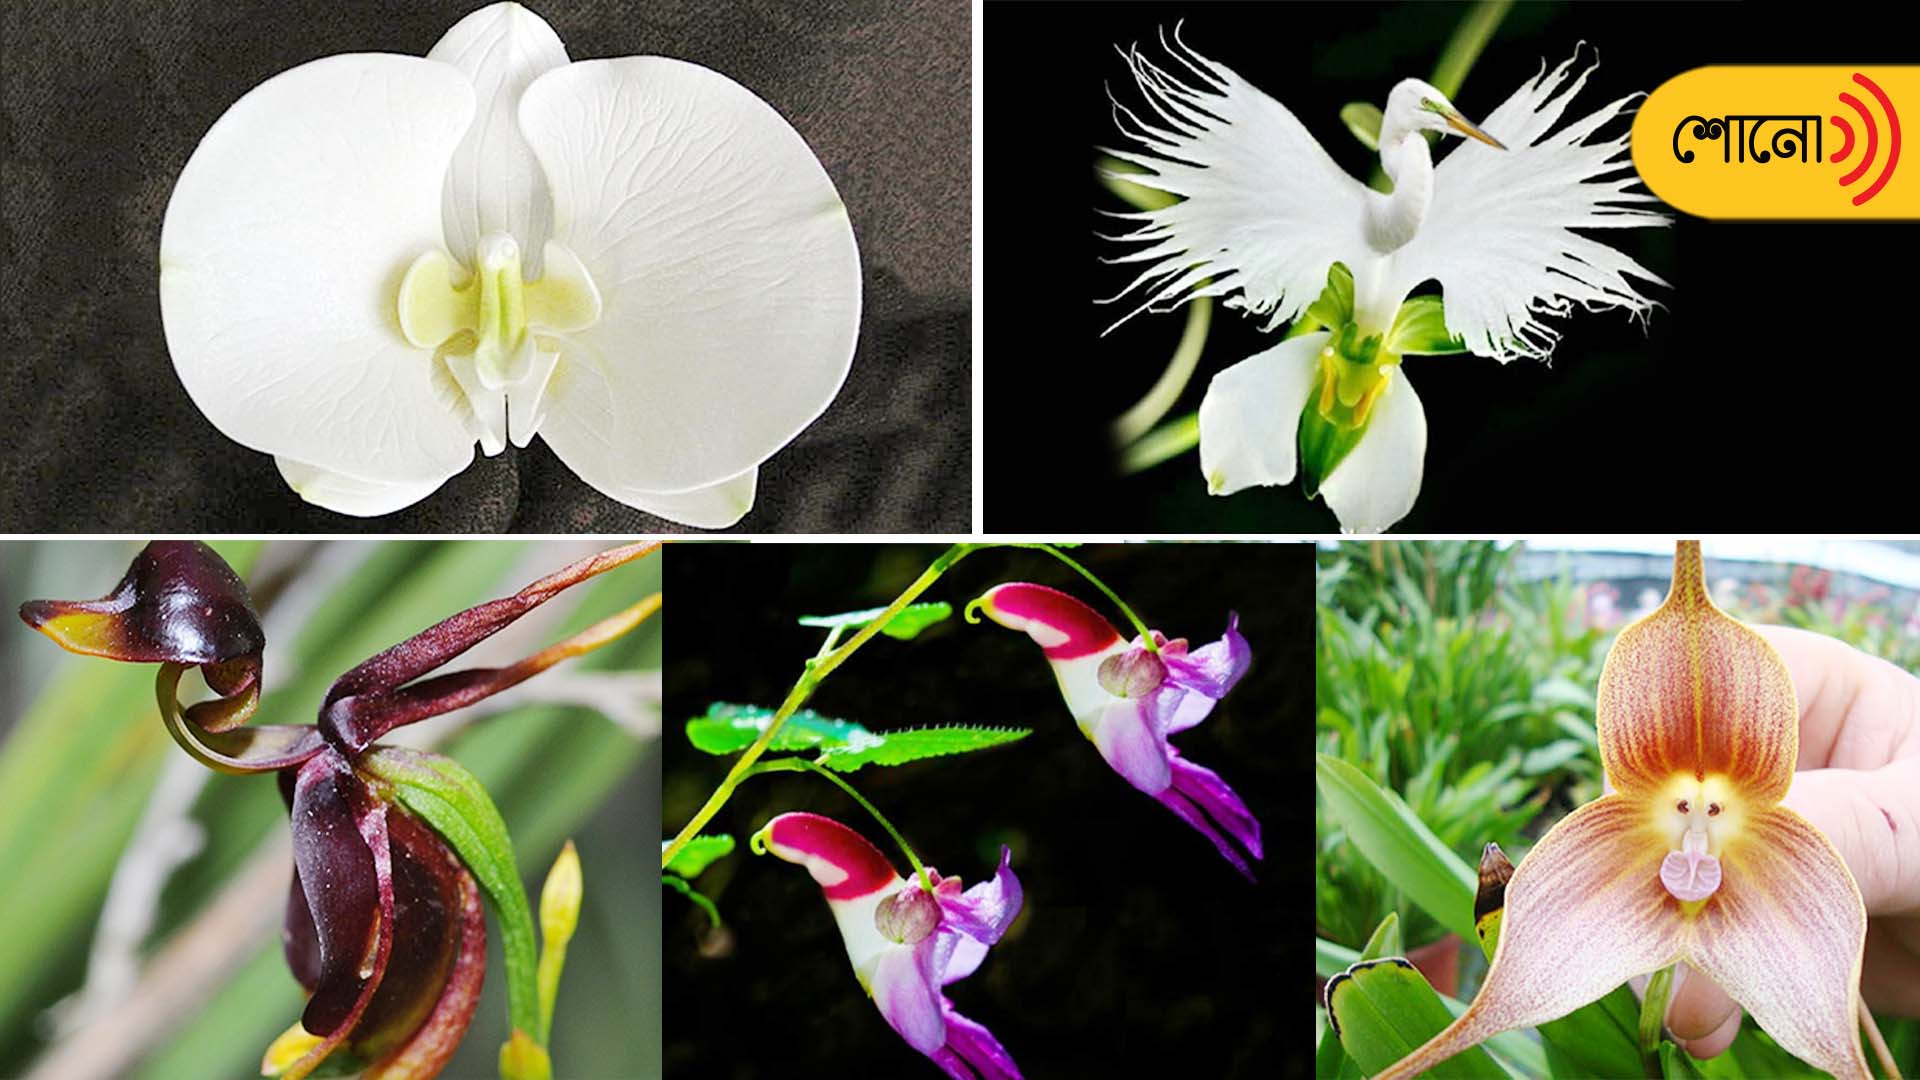 Know more about the Plants that Look like Animals